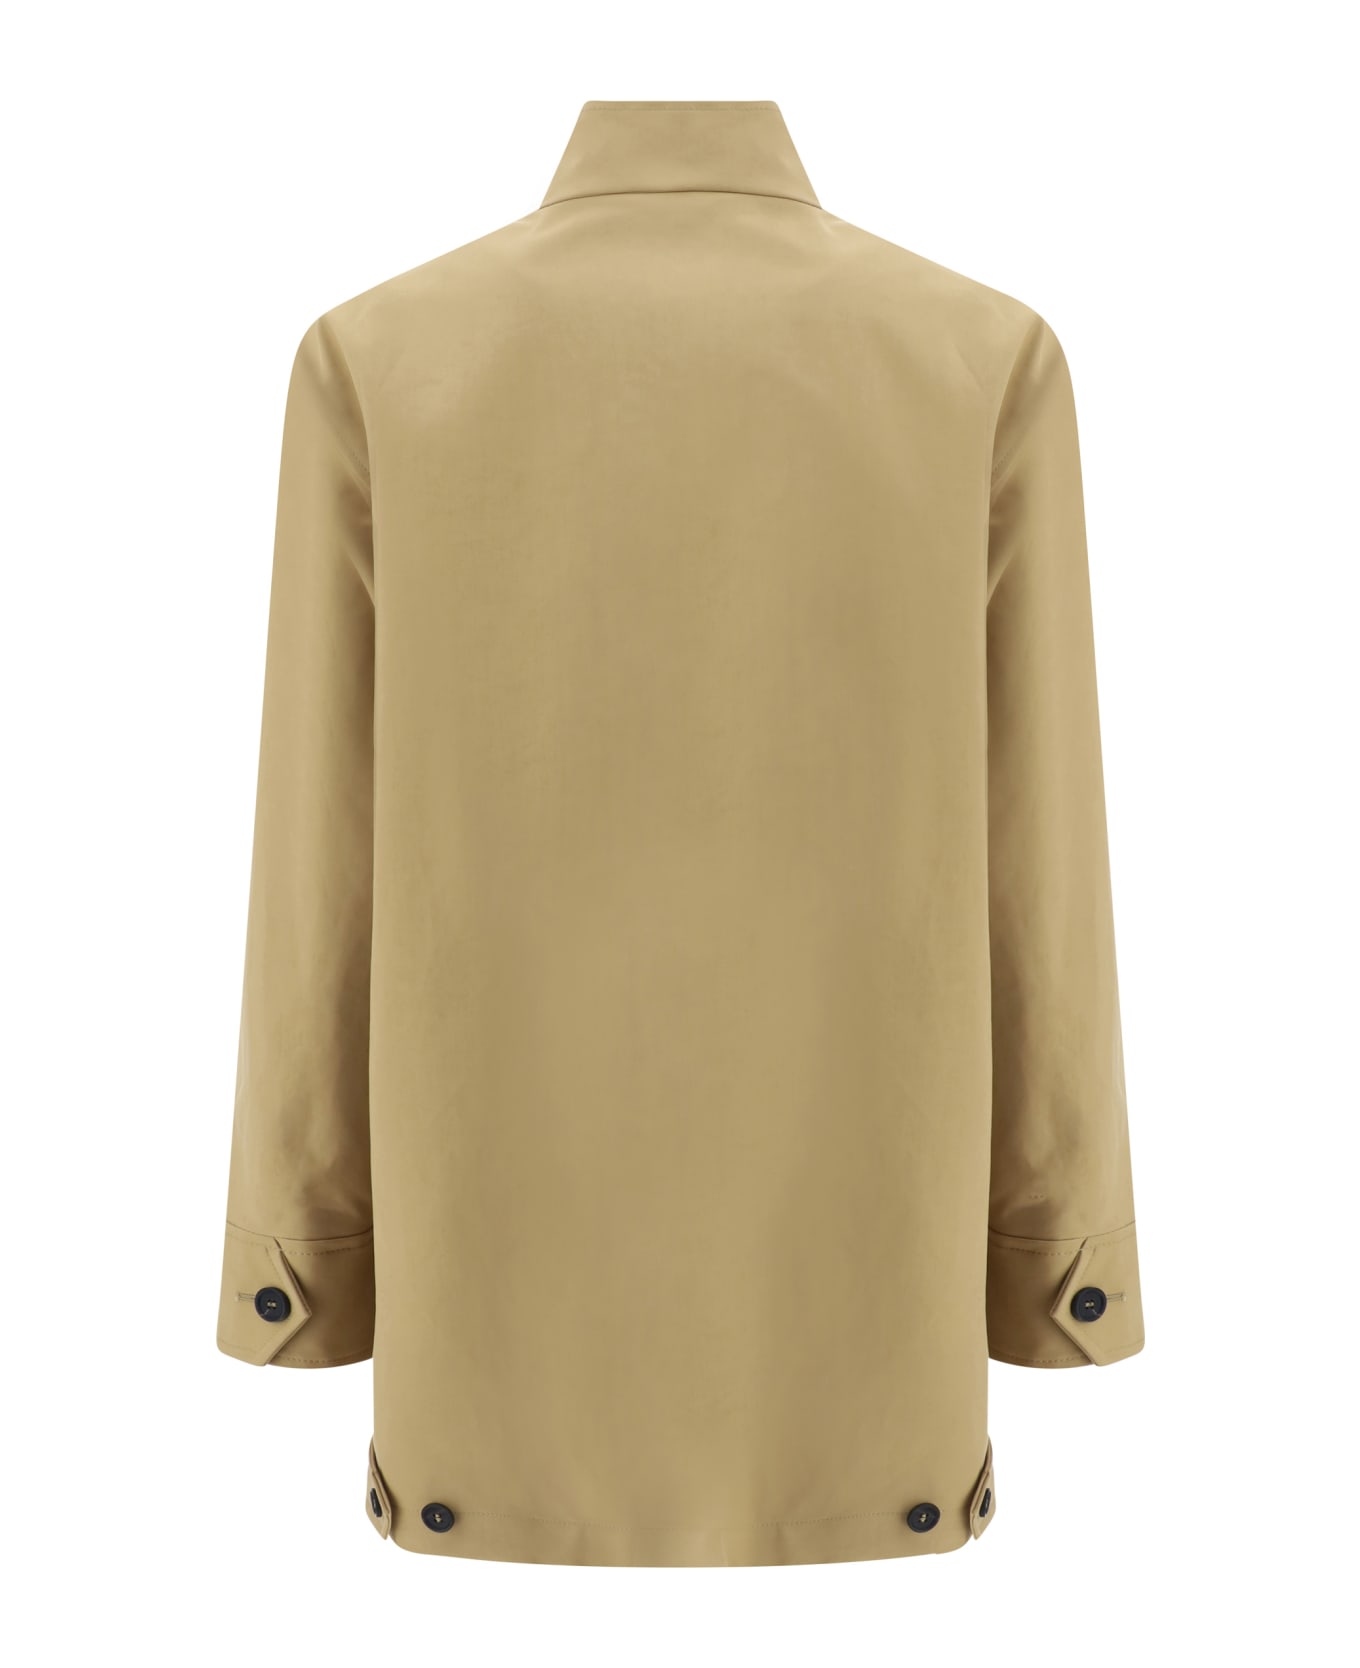 Fabiana Filippi Trench Coat - Only One Color